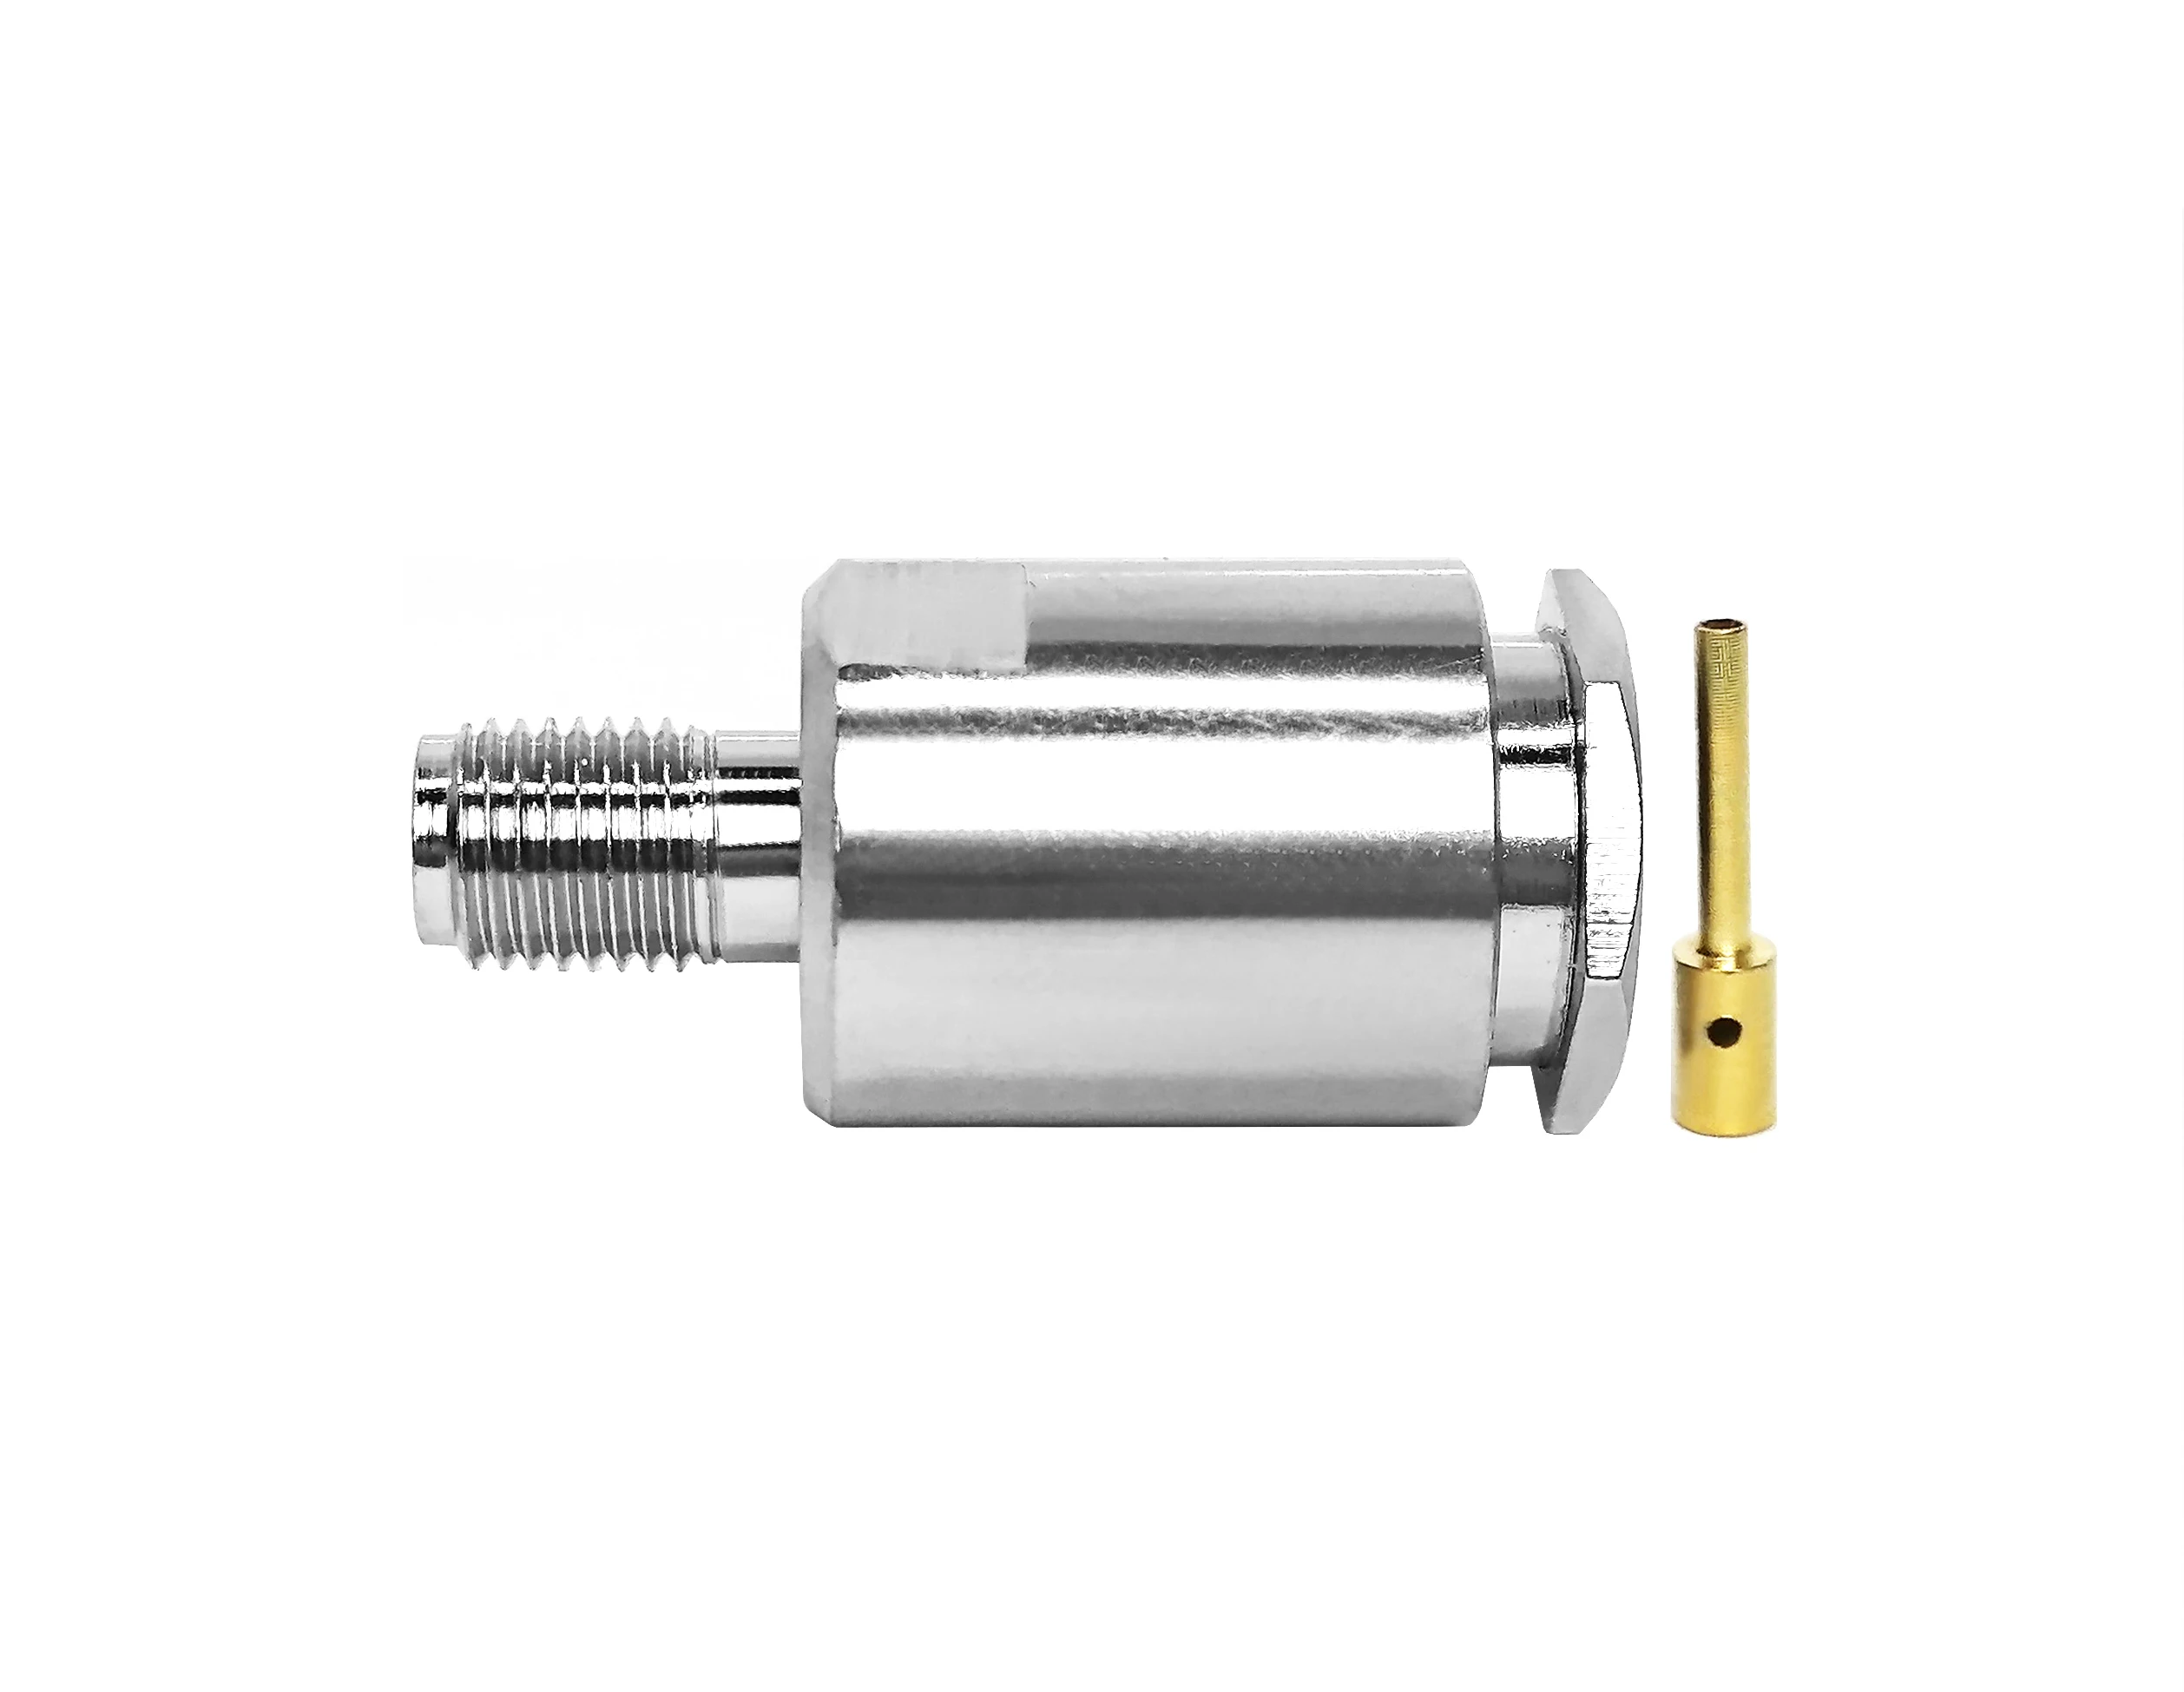 SMA FEMALE SCREW CLAMP MOUNTING LMR240 H155 CABLE RF COAX CONNECTORS manufacture